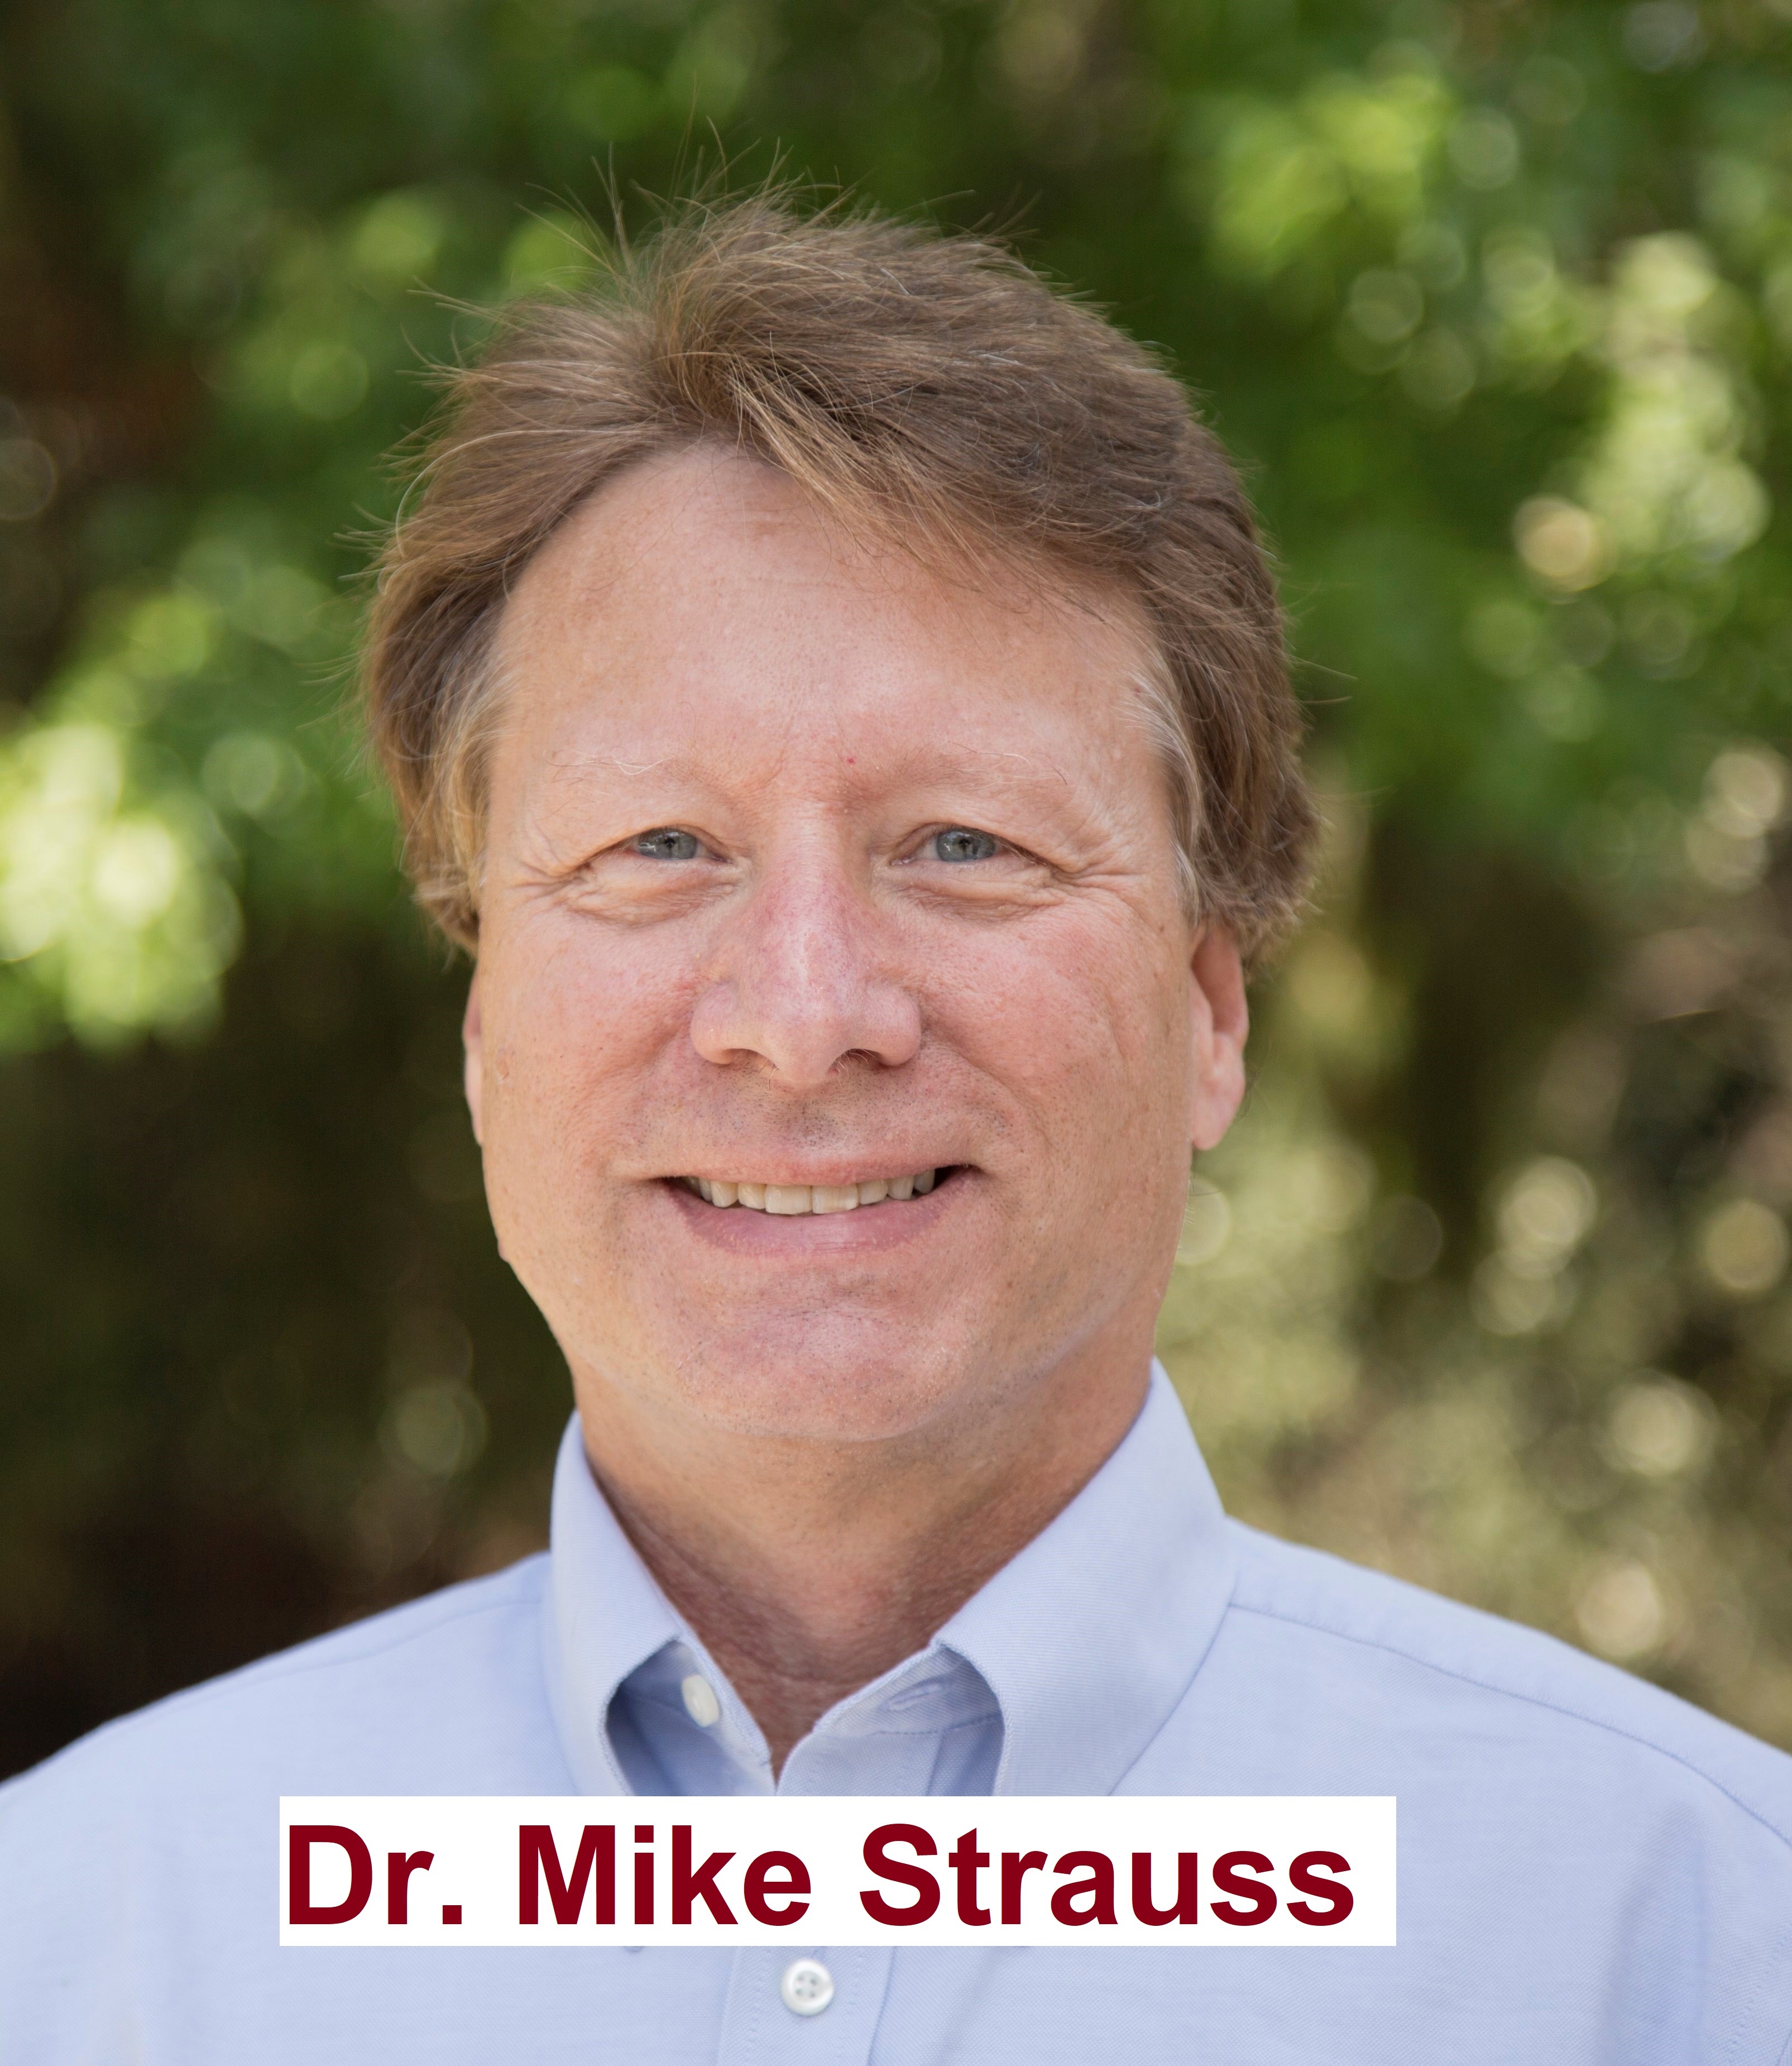 Dr. Mike Strauss